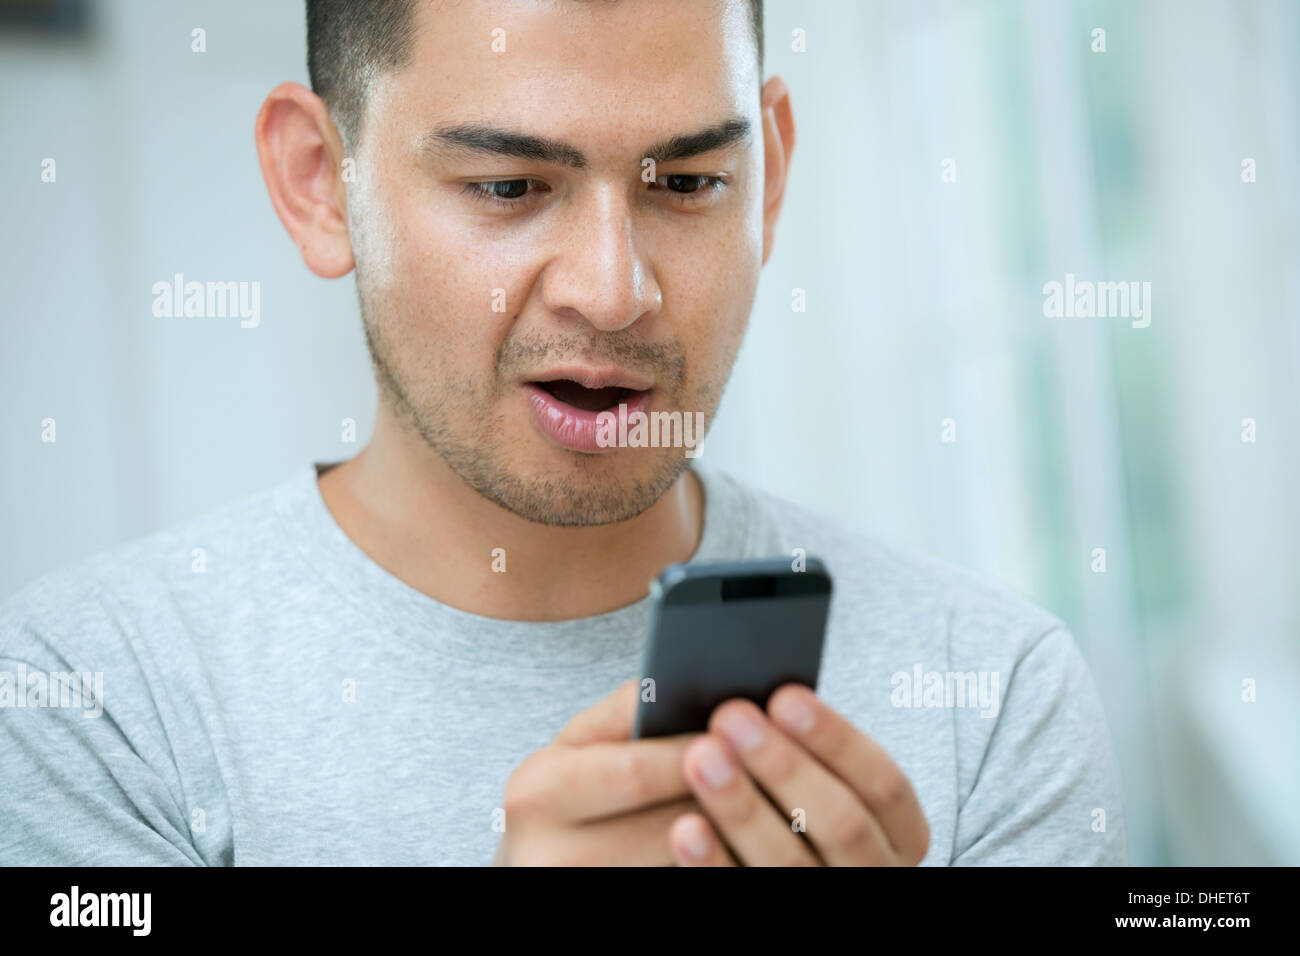 Mid adult man looking surprised at smartphone Stock Photo